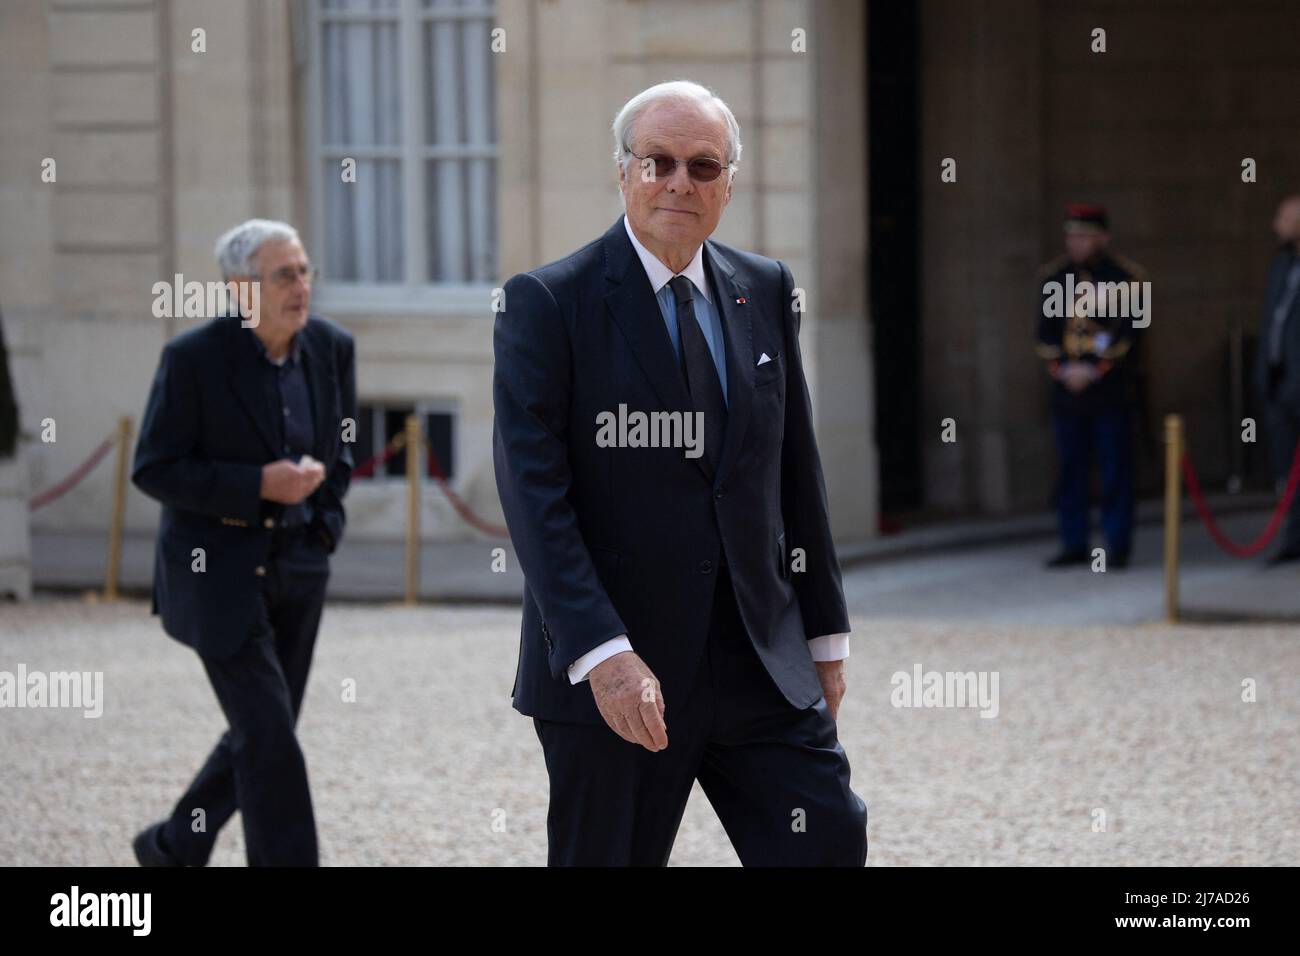 Paris, France. 07th May, 2022. French banker David de Rothschild arrives at the Elysee presidential palace in Paris on May 7, 2022, to attend the investiture ceremony of Emmanuel Macron as French President, following his re-election last April 24. Photo by Raphael Lafargue/ABACAPRESS.COM Credit: Abaca Press/Alamy Live News Stock Photo